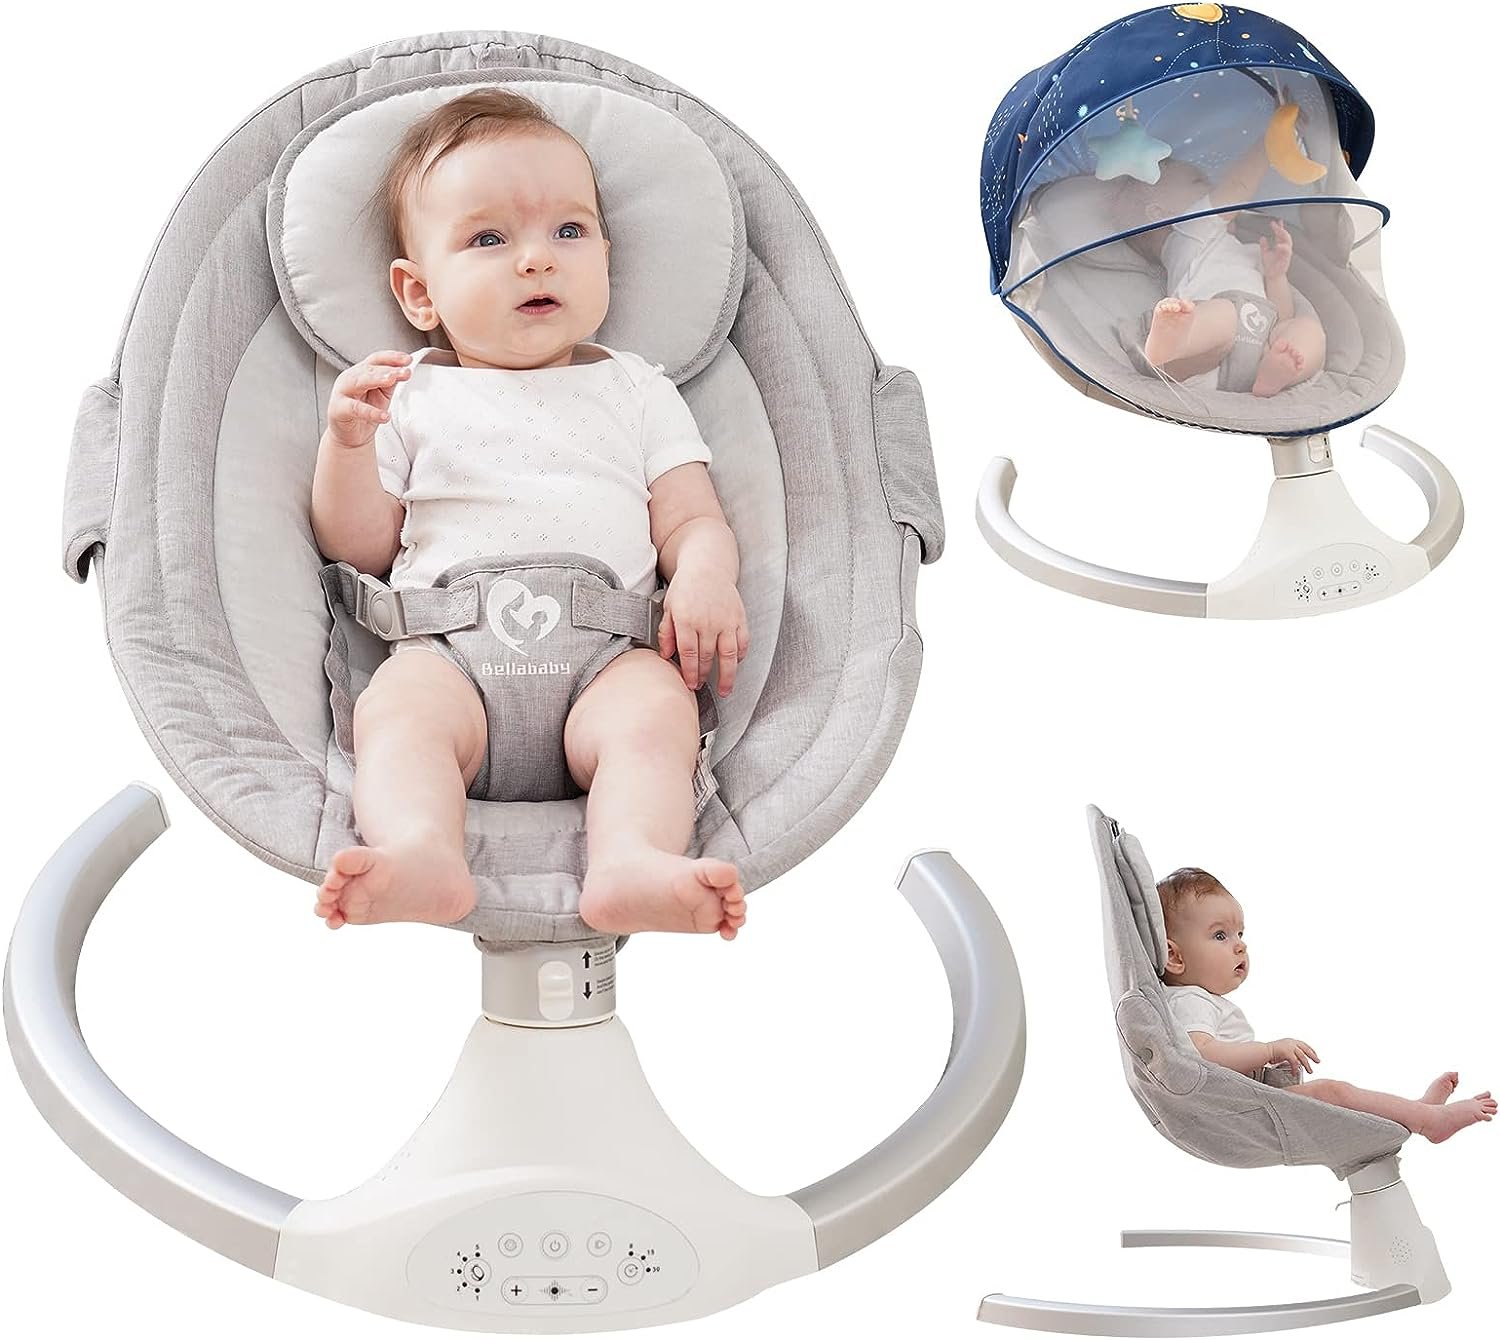 Bellababy Bluetooth Baby Swing for Infants, Compact  Portable Baby Bouncer, 3 Seat Positions, 5 Speed, 10 Lullabies, Remote Control, USB Plug-in Power, Indoor/Outdoor Baby Rocker, Boy/Girl